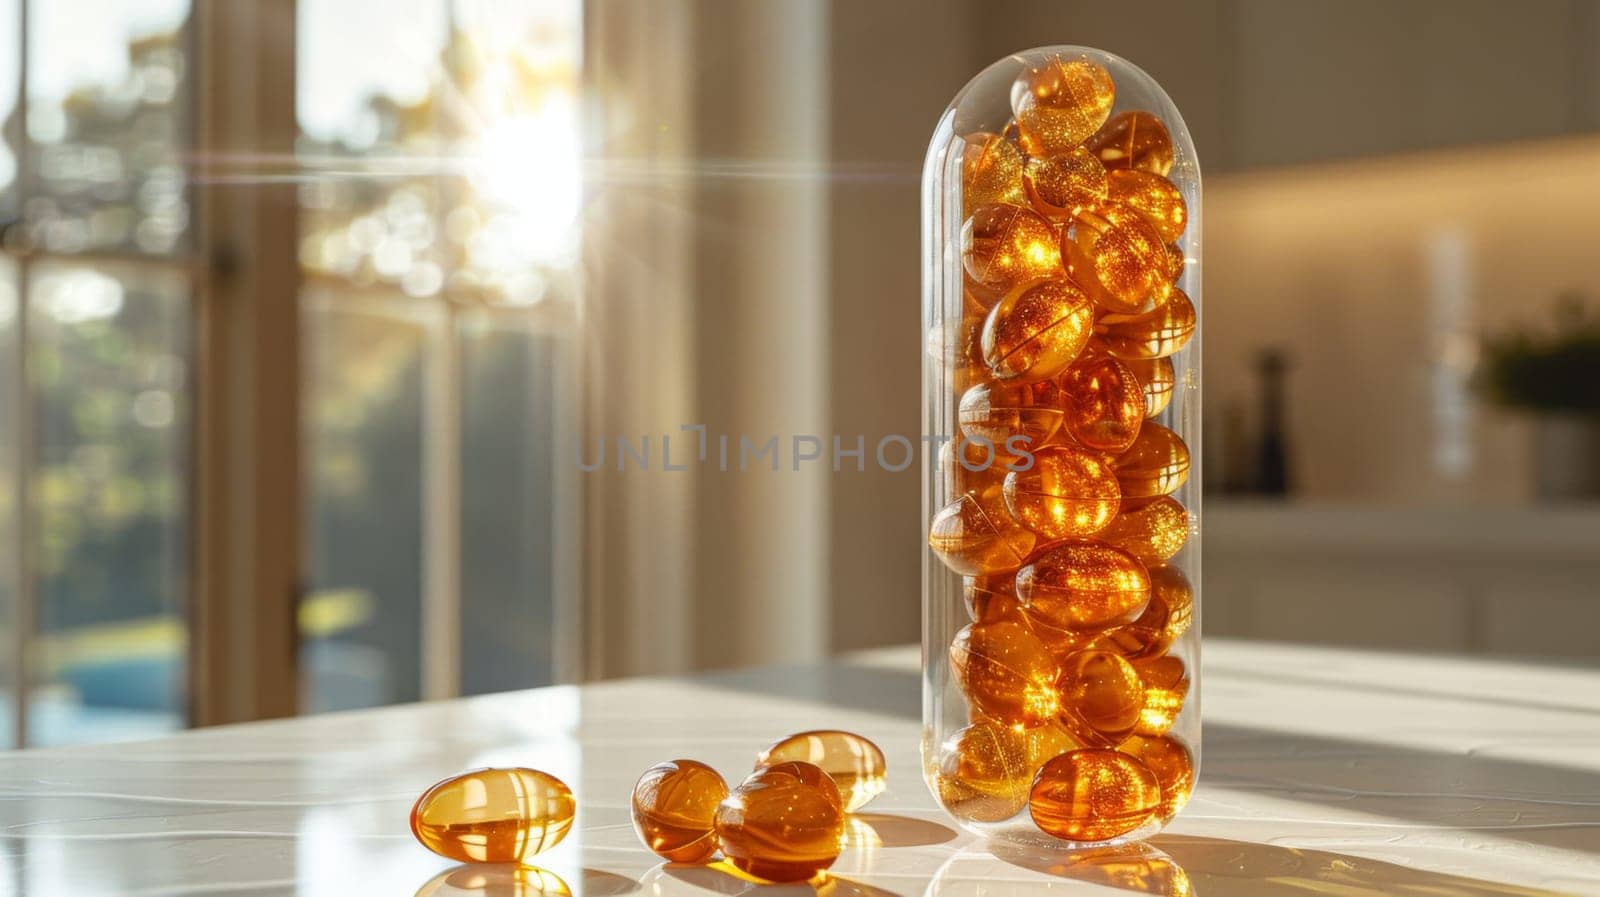 One capsule in a transparent shell with vitamin granules inside on the table.